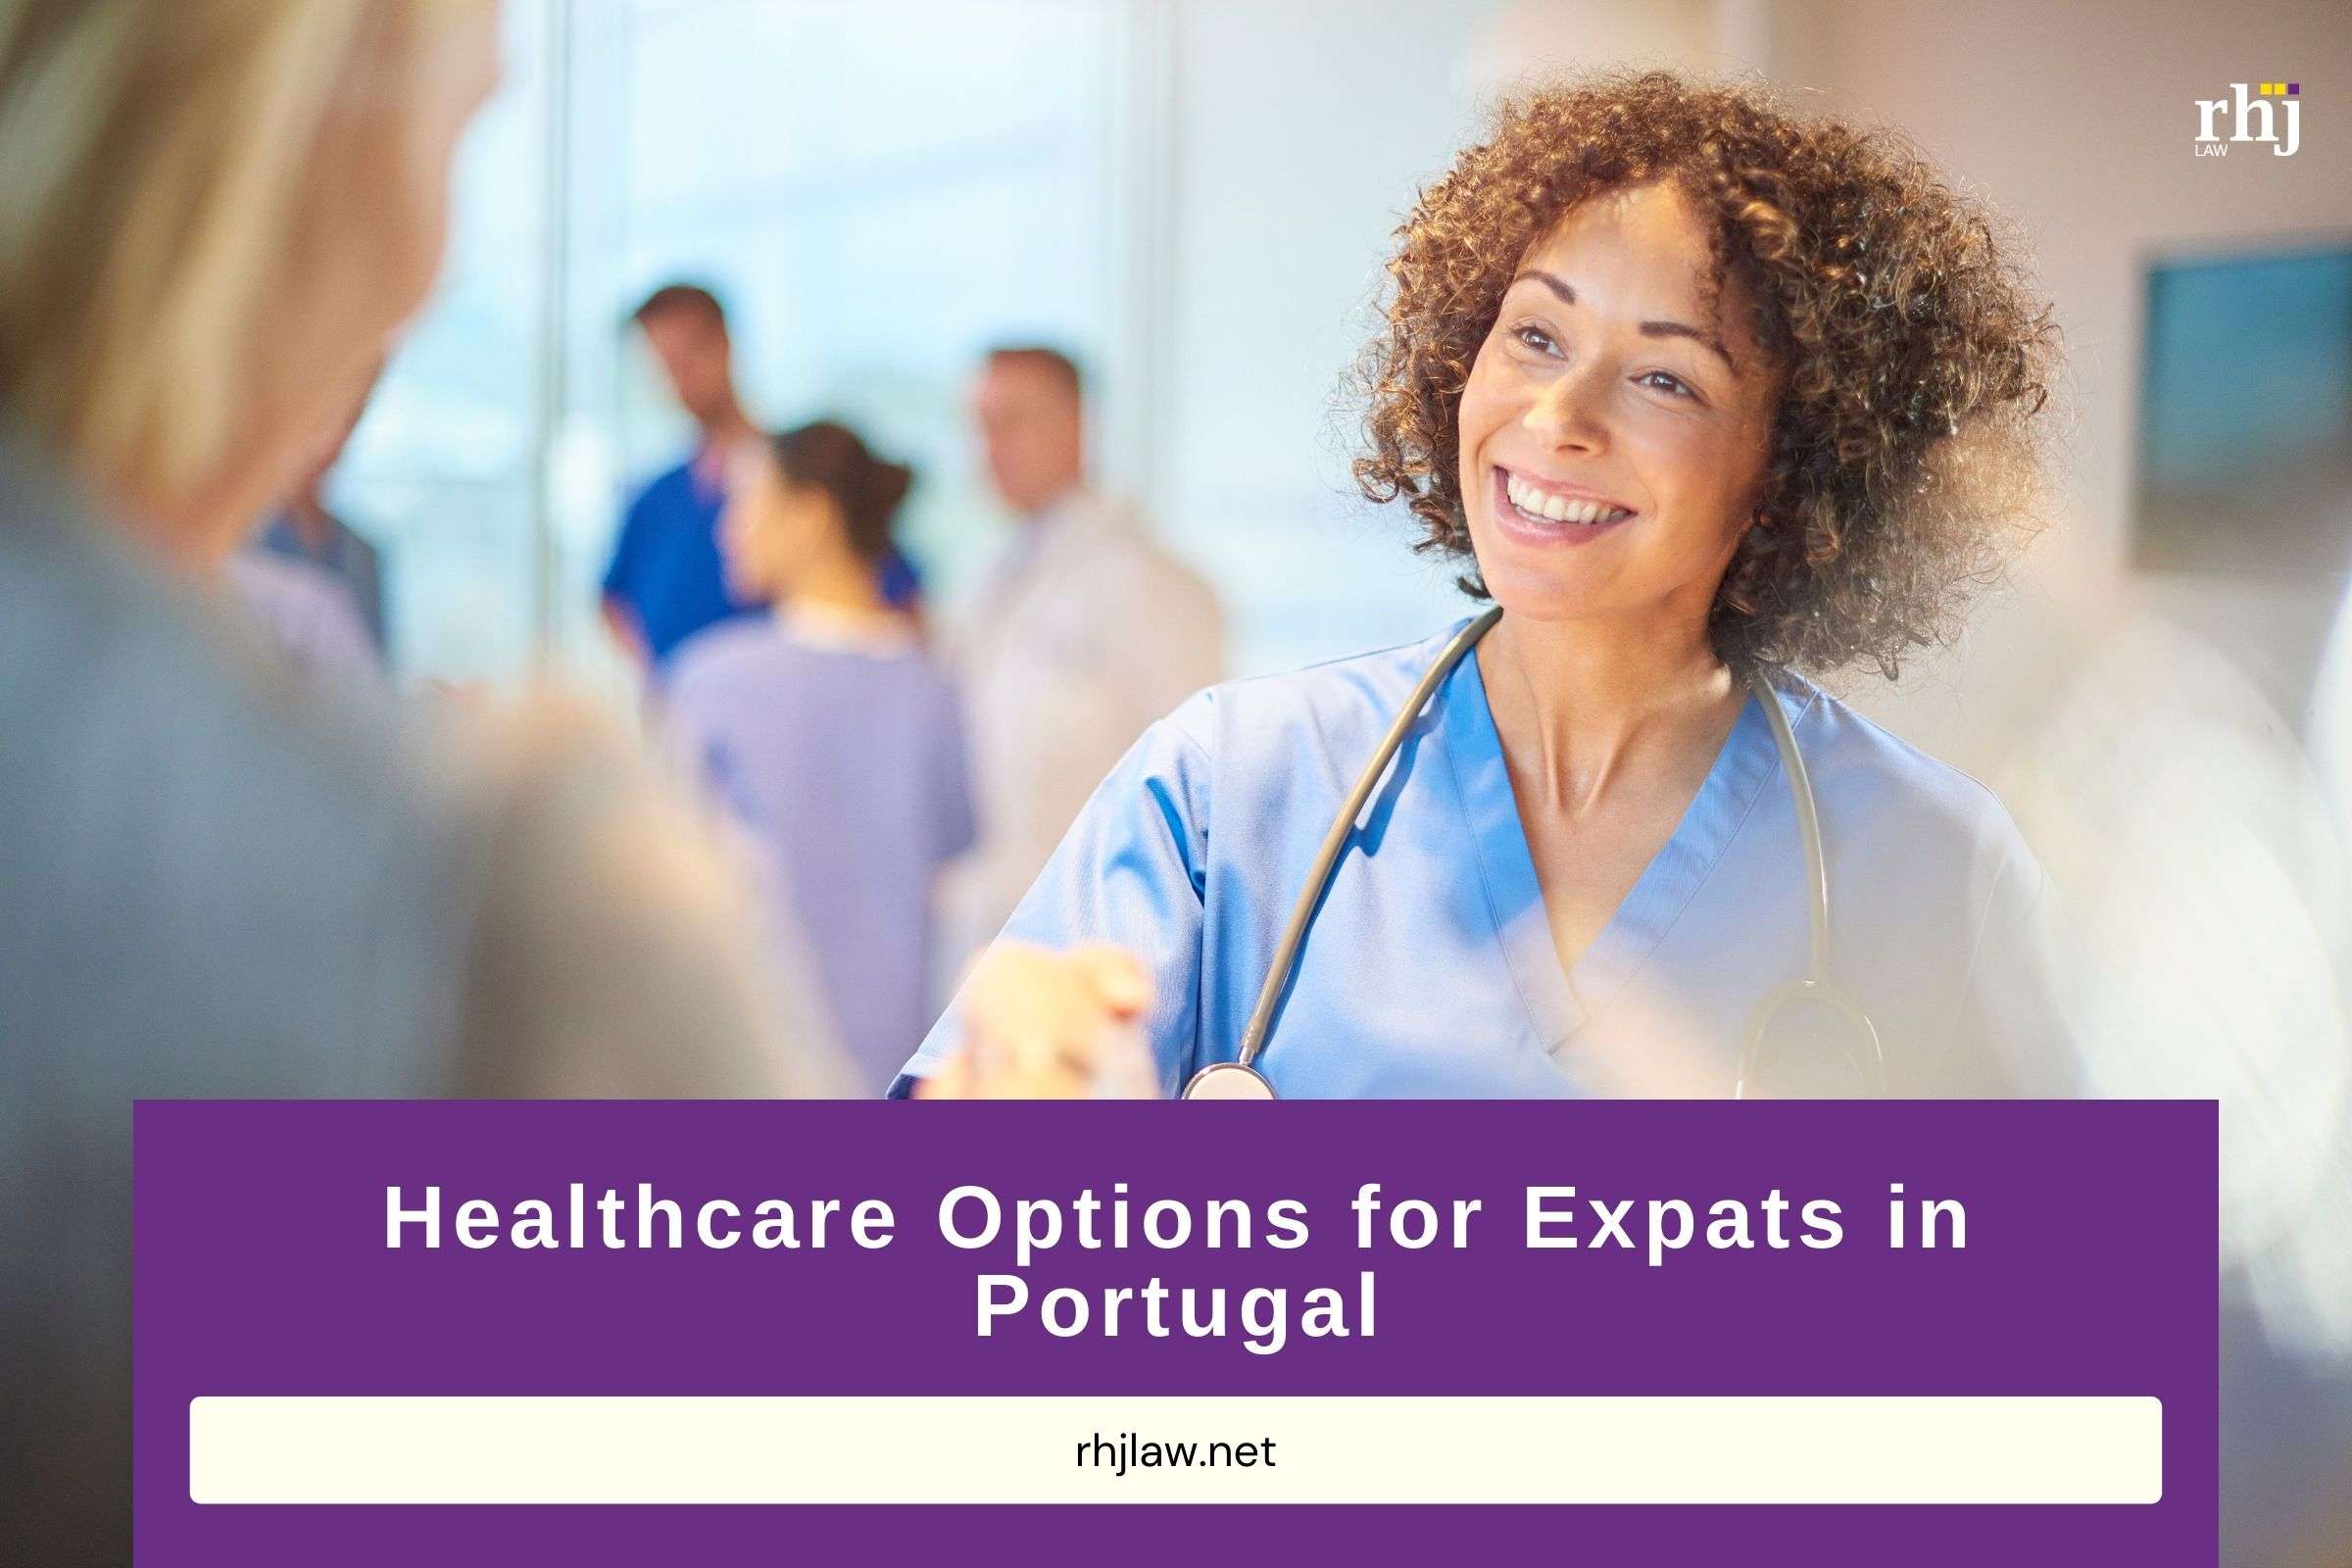 Healthcare Options for Expats in Portugal